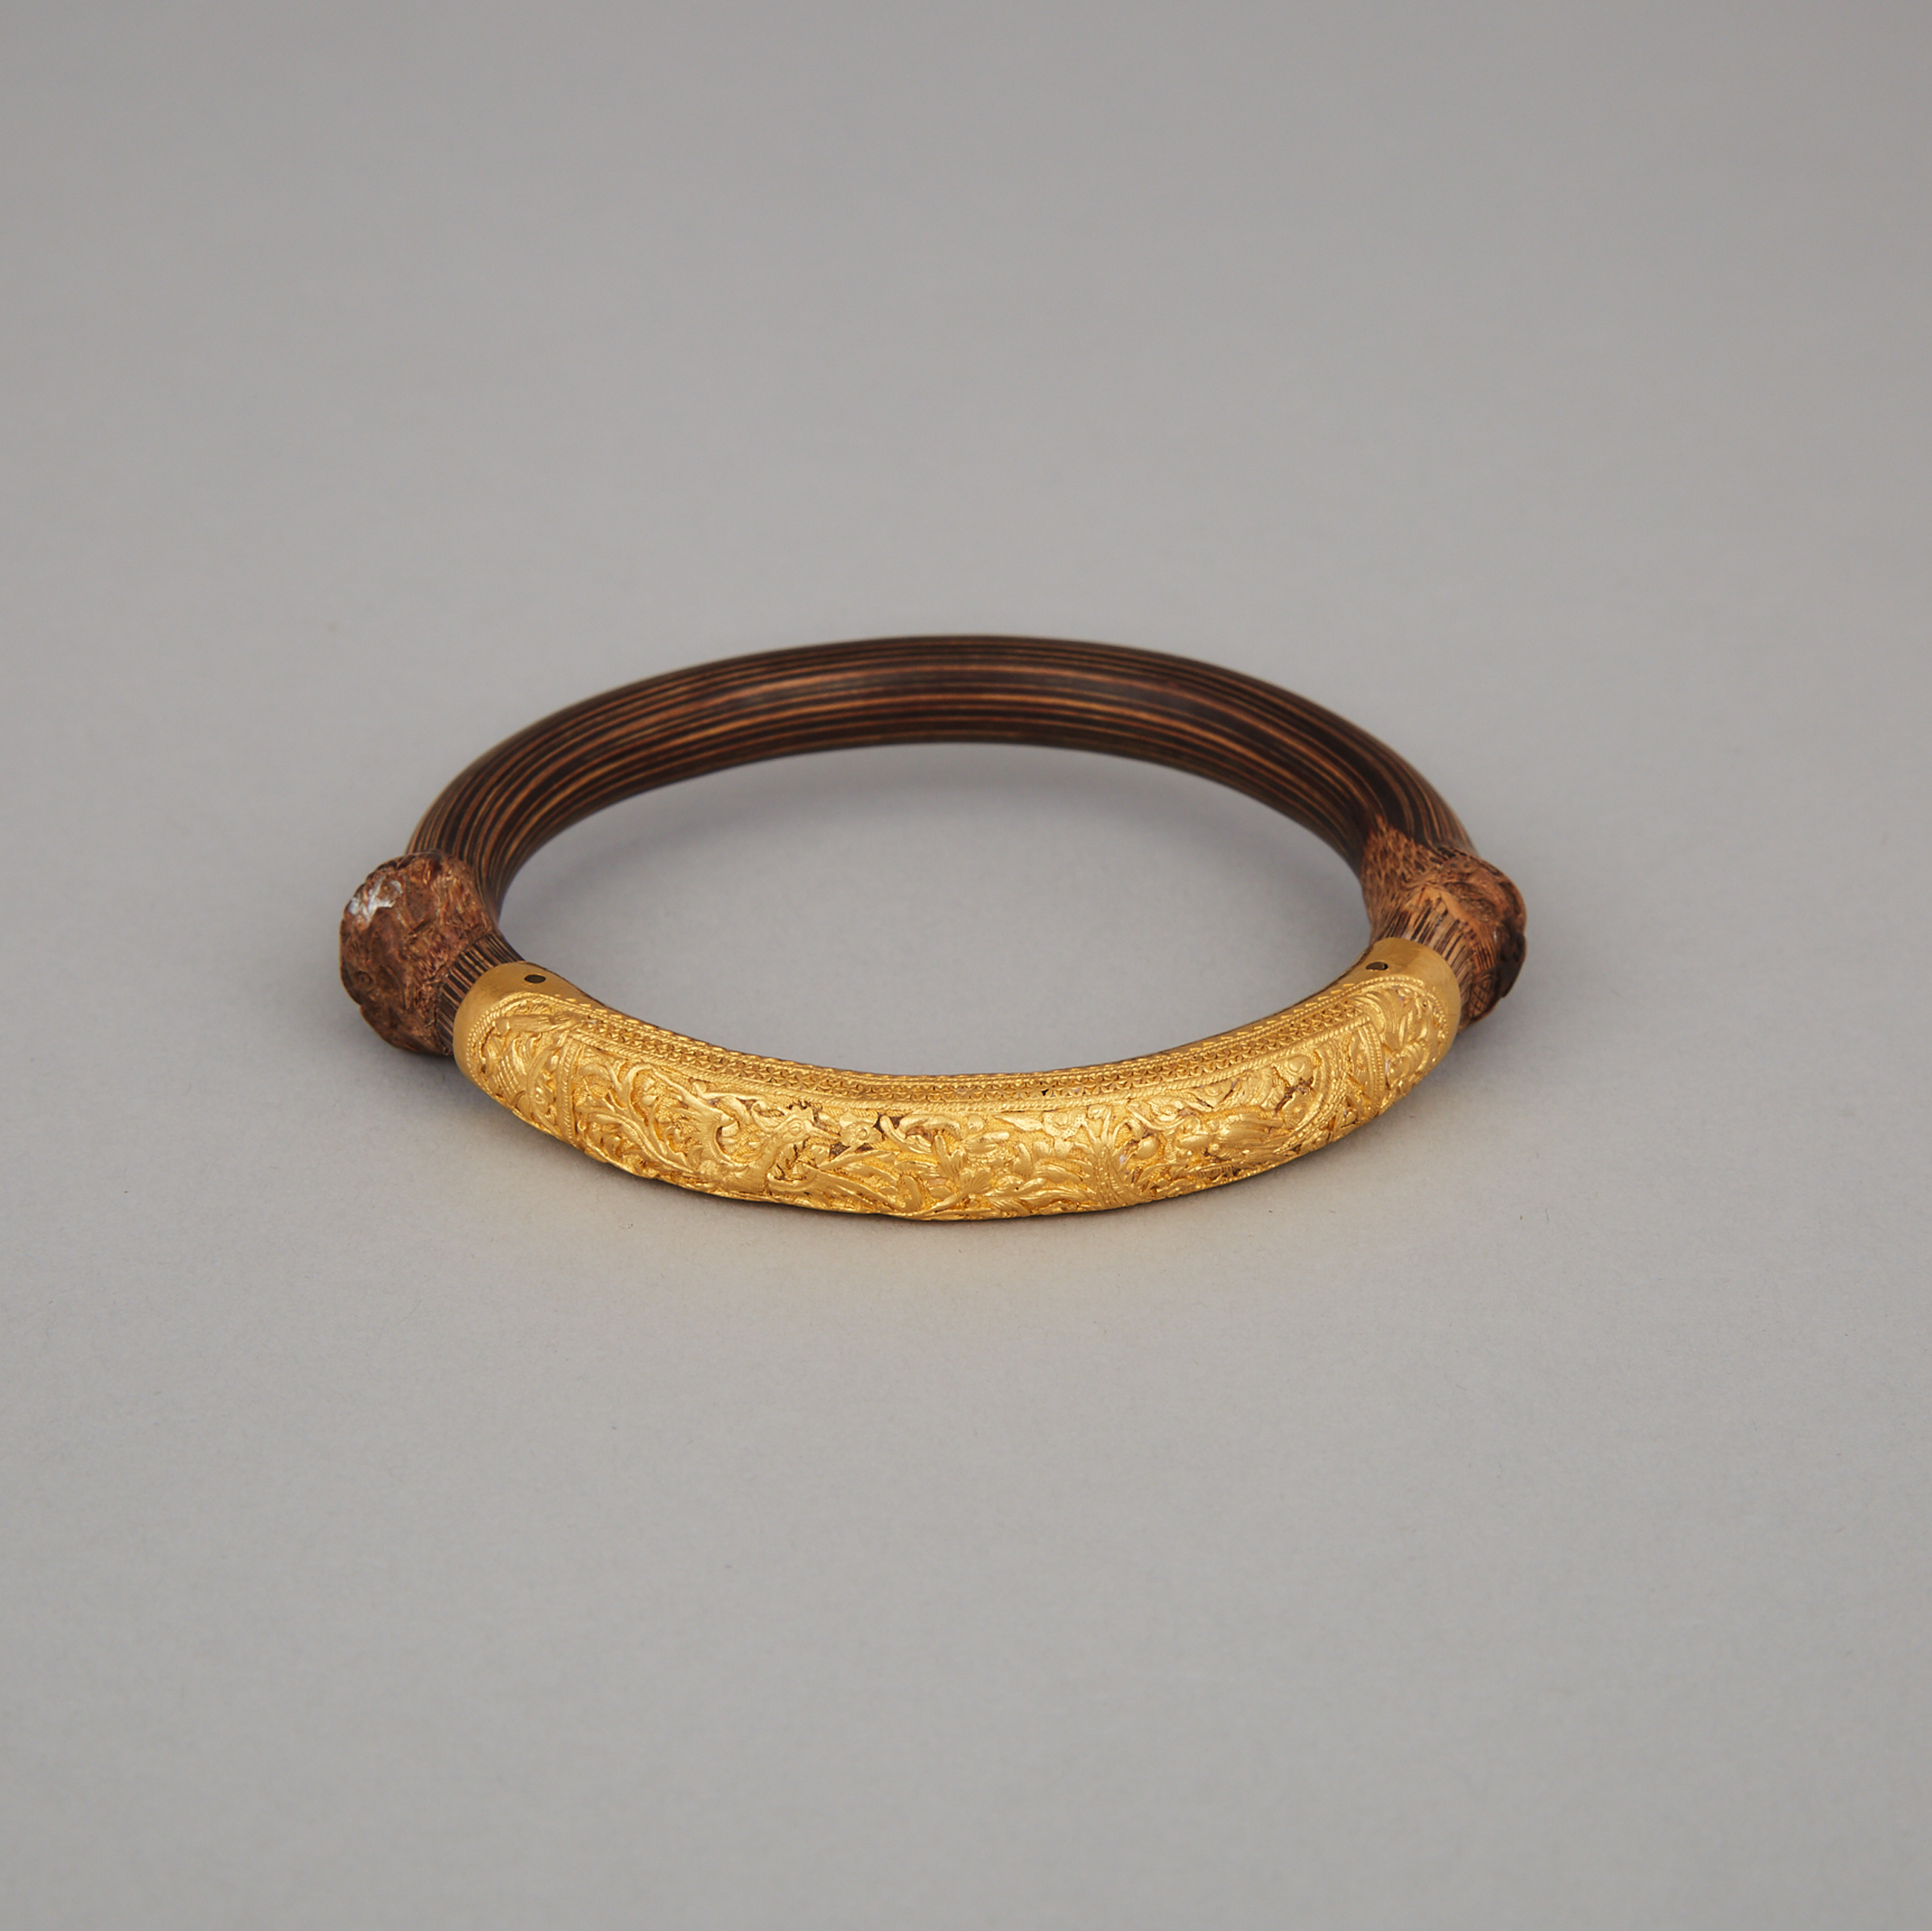 A Bamboo Carved Bangle with Gold Clasp